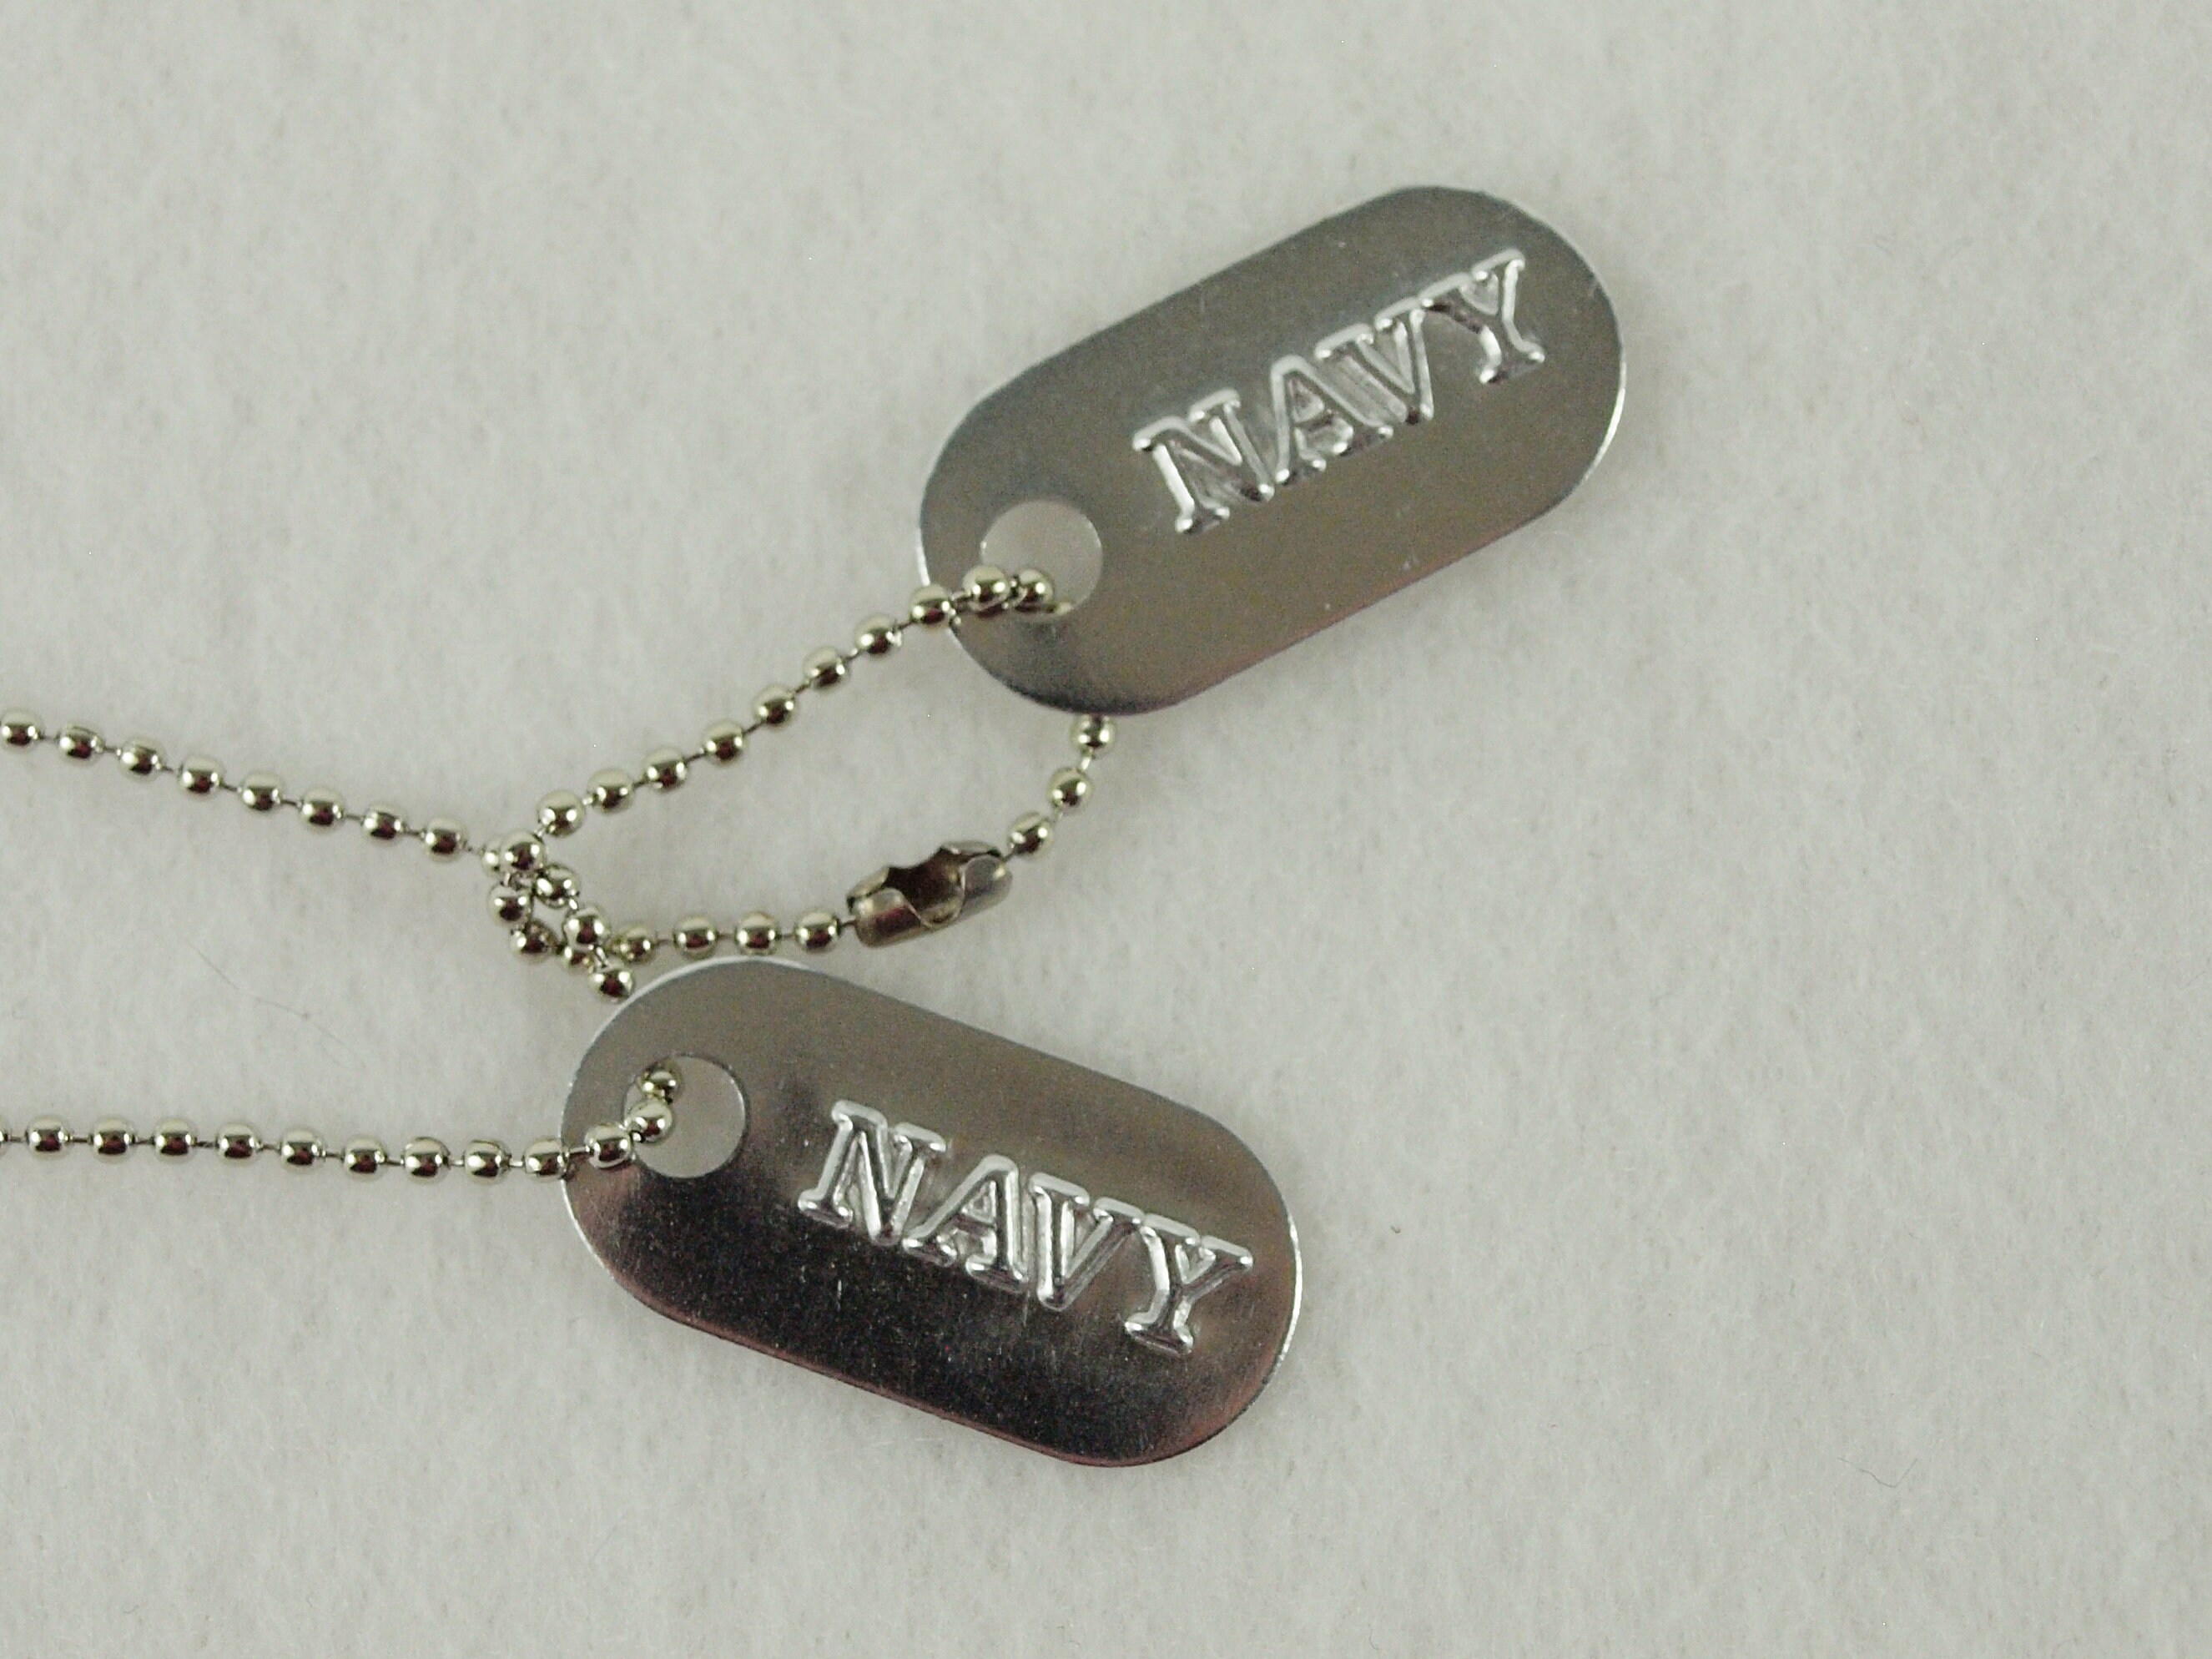 A Complete Guideline to Military Dog Tags - U7 Jewelry